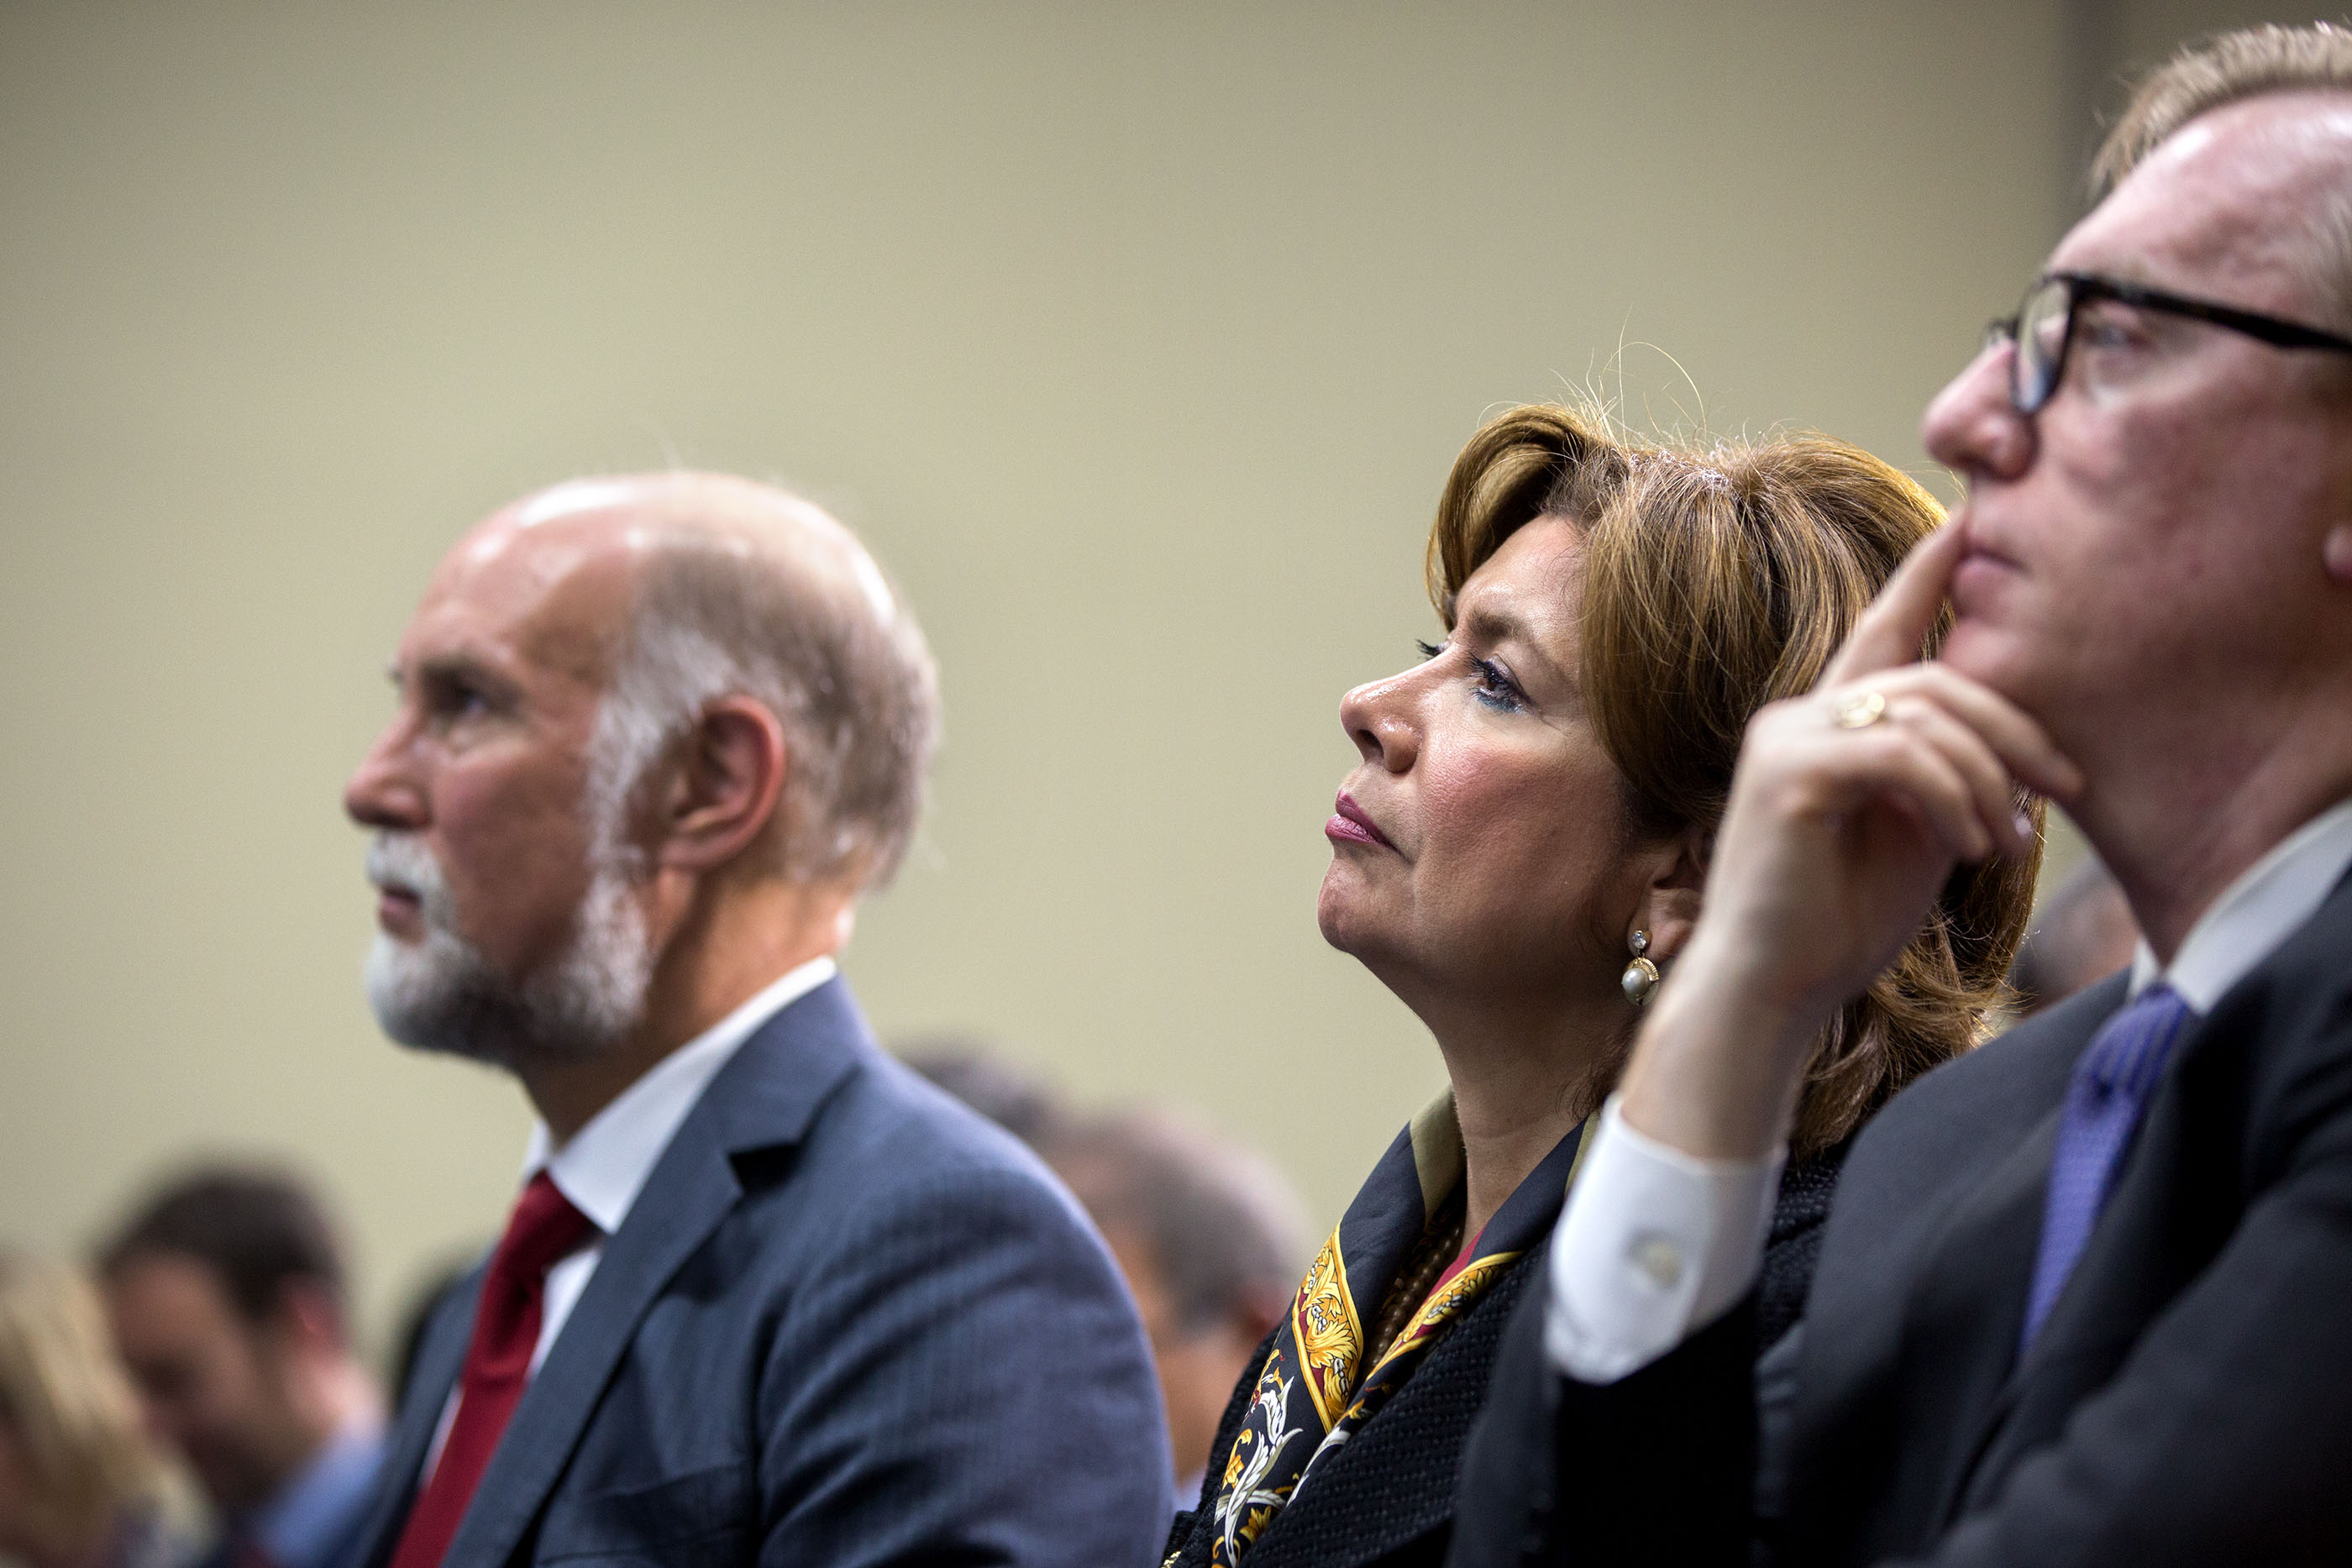 Small Business Administration Director Maria Contreras-Sweet and others listen during the President's press conference. (Official White House Photo by Pete Souza)